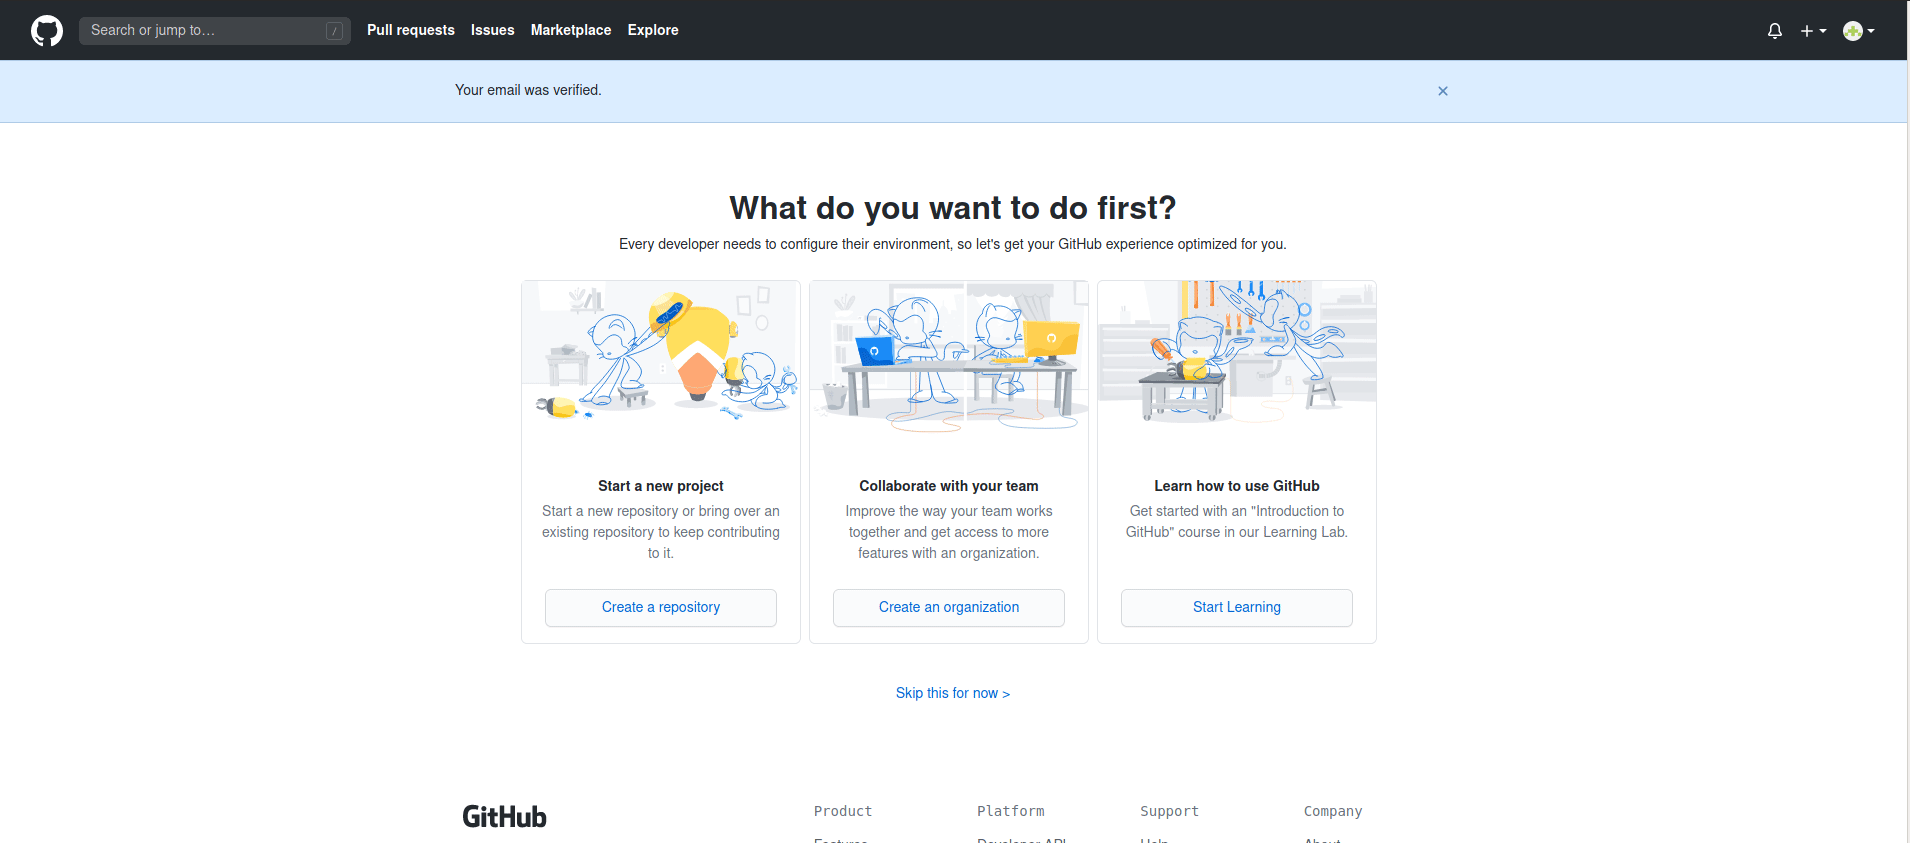 Go to your own Github profile